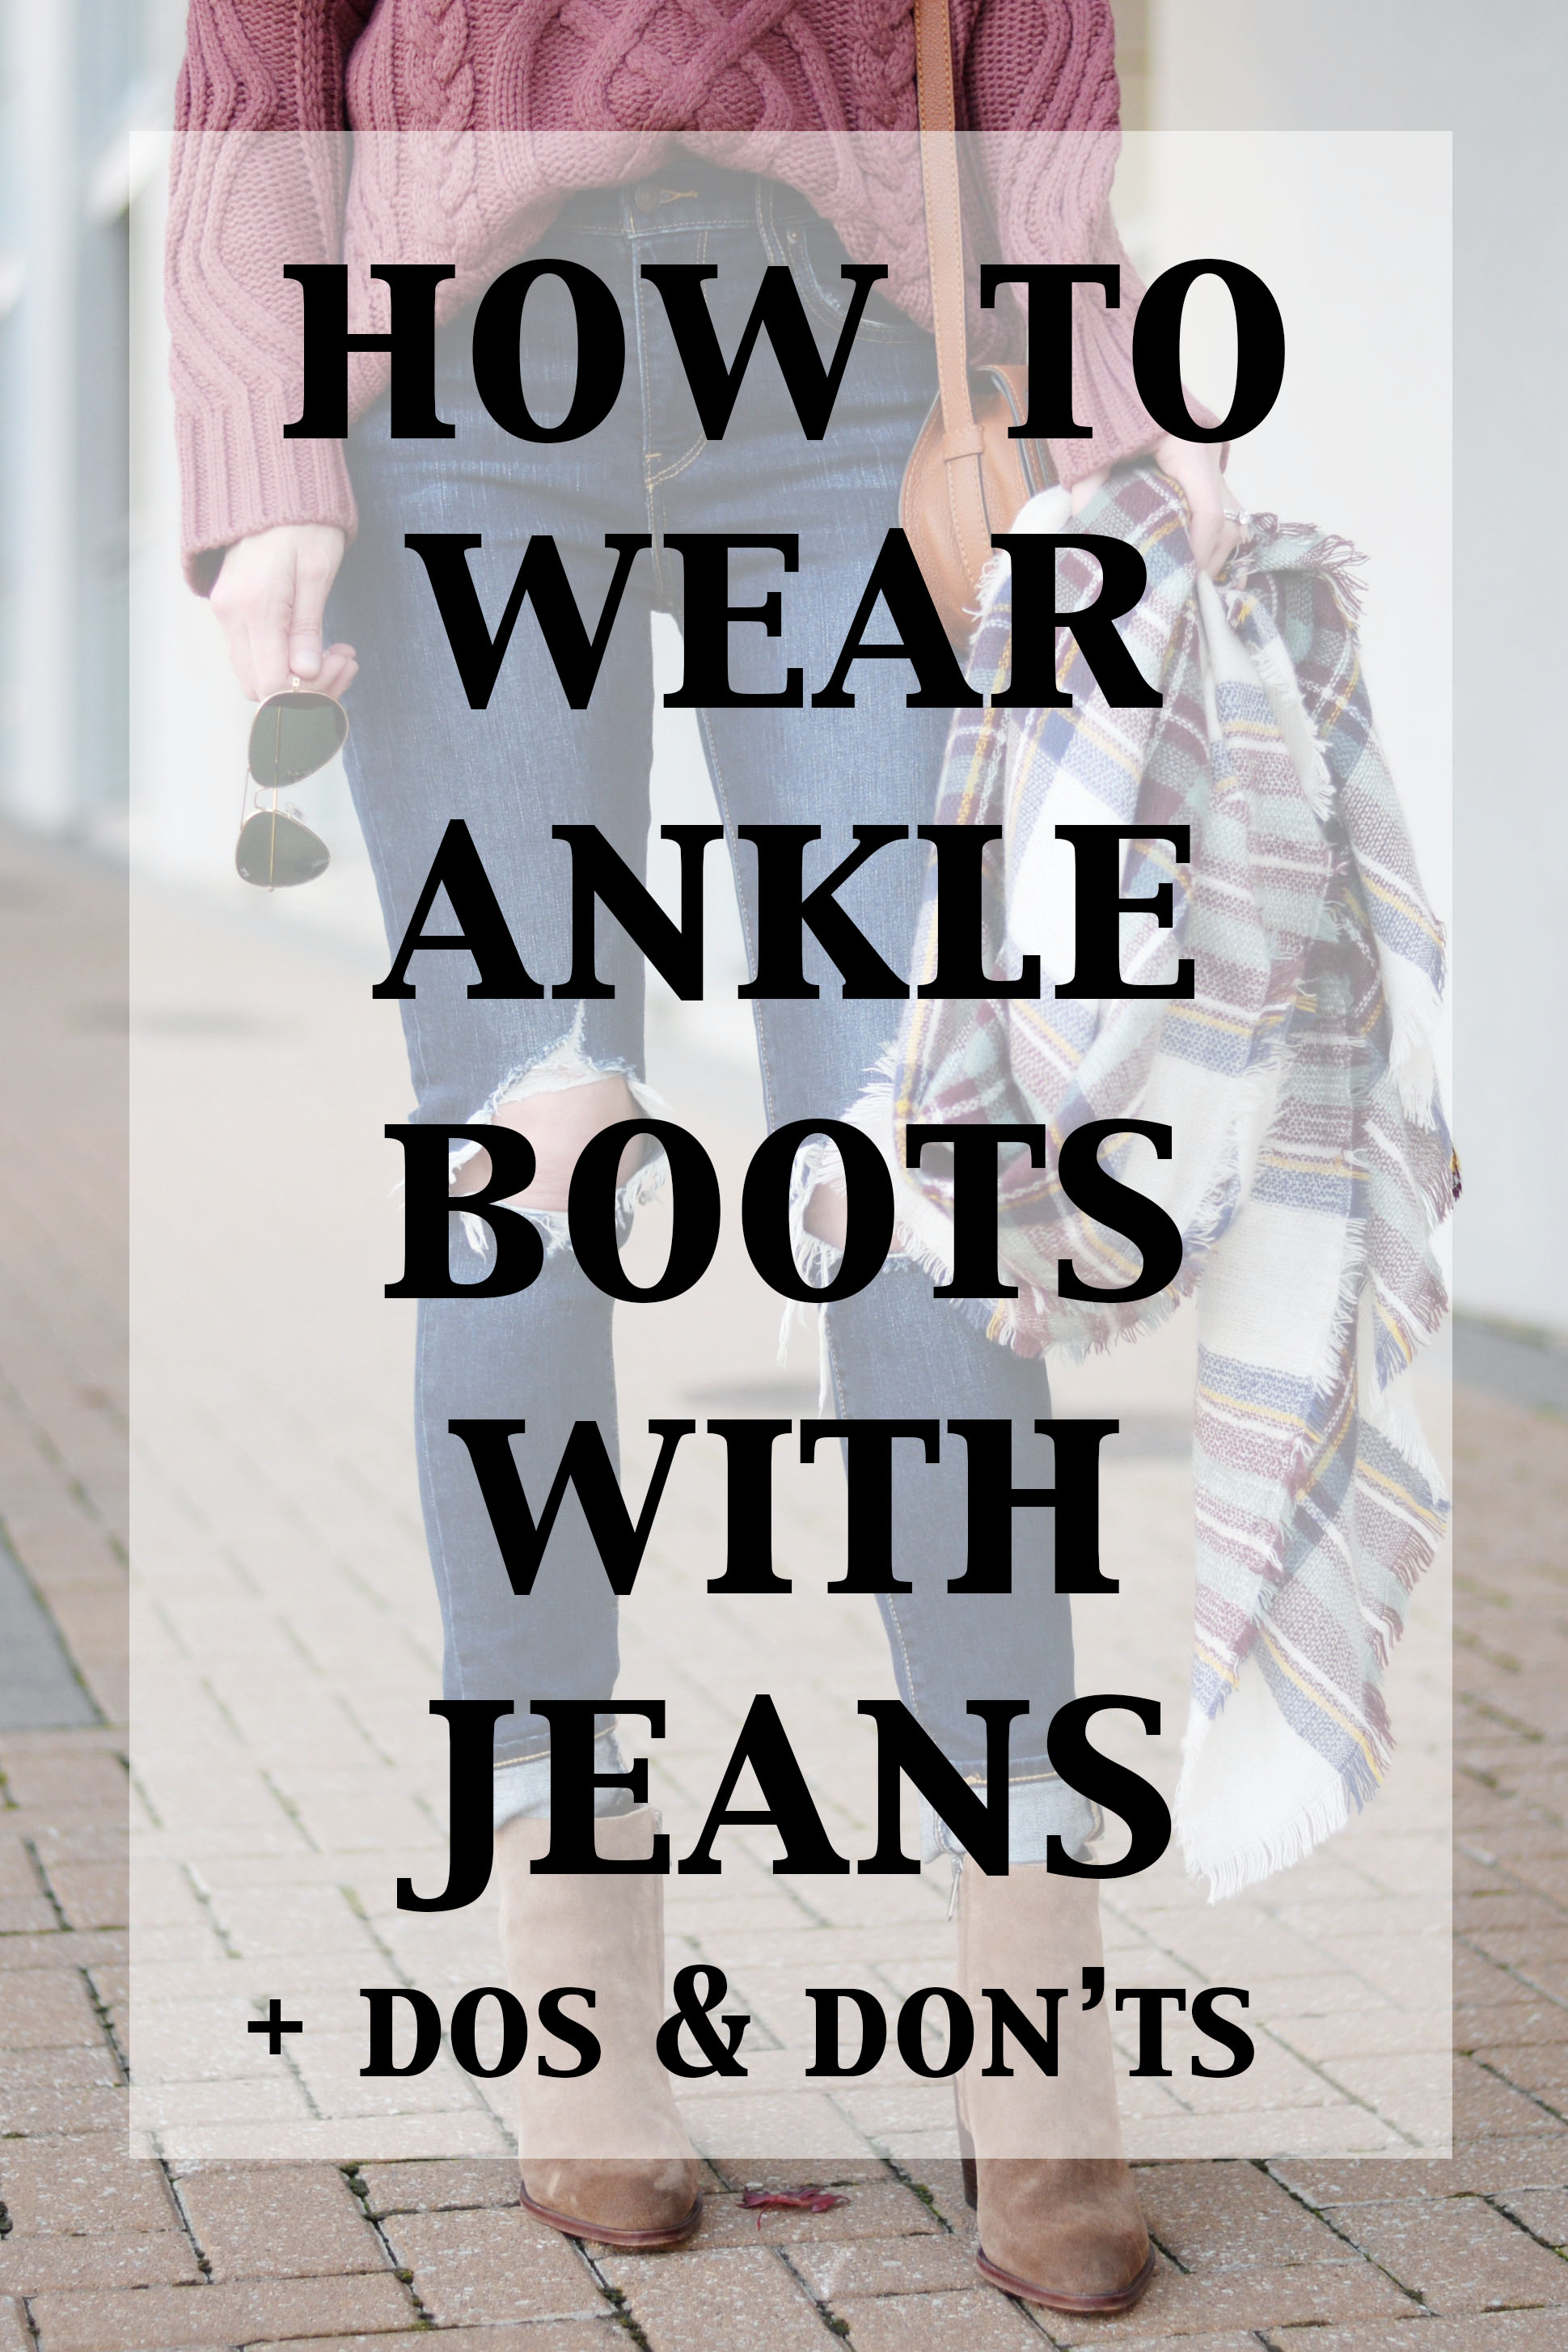 How to Wear Ankle Boots with Jeans - The Dos & Don'ts - Straight A